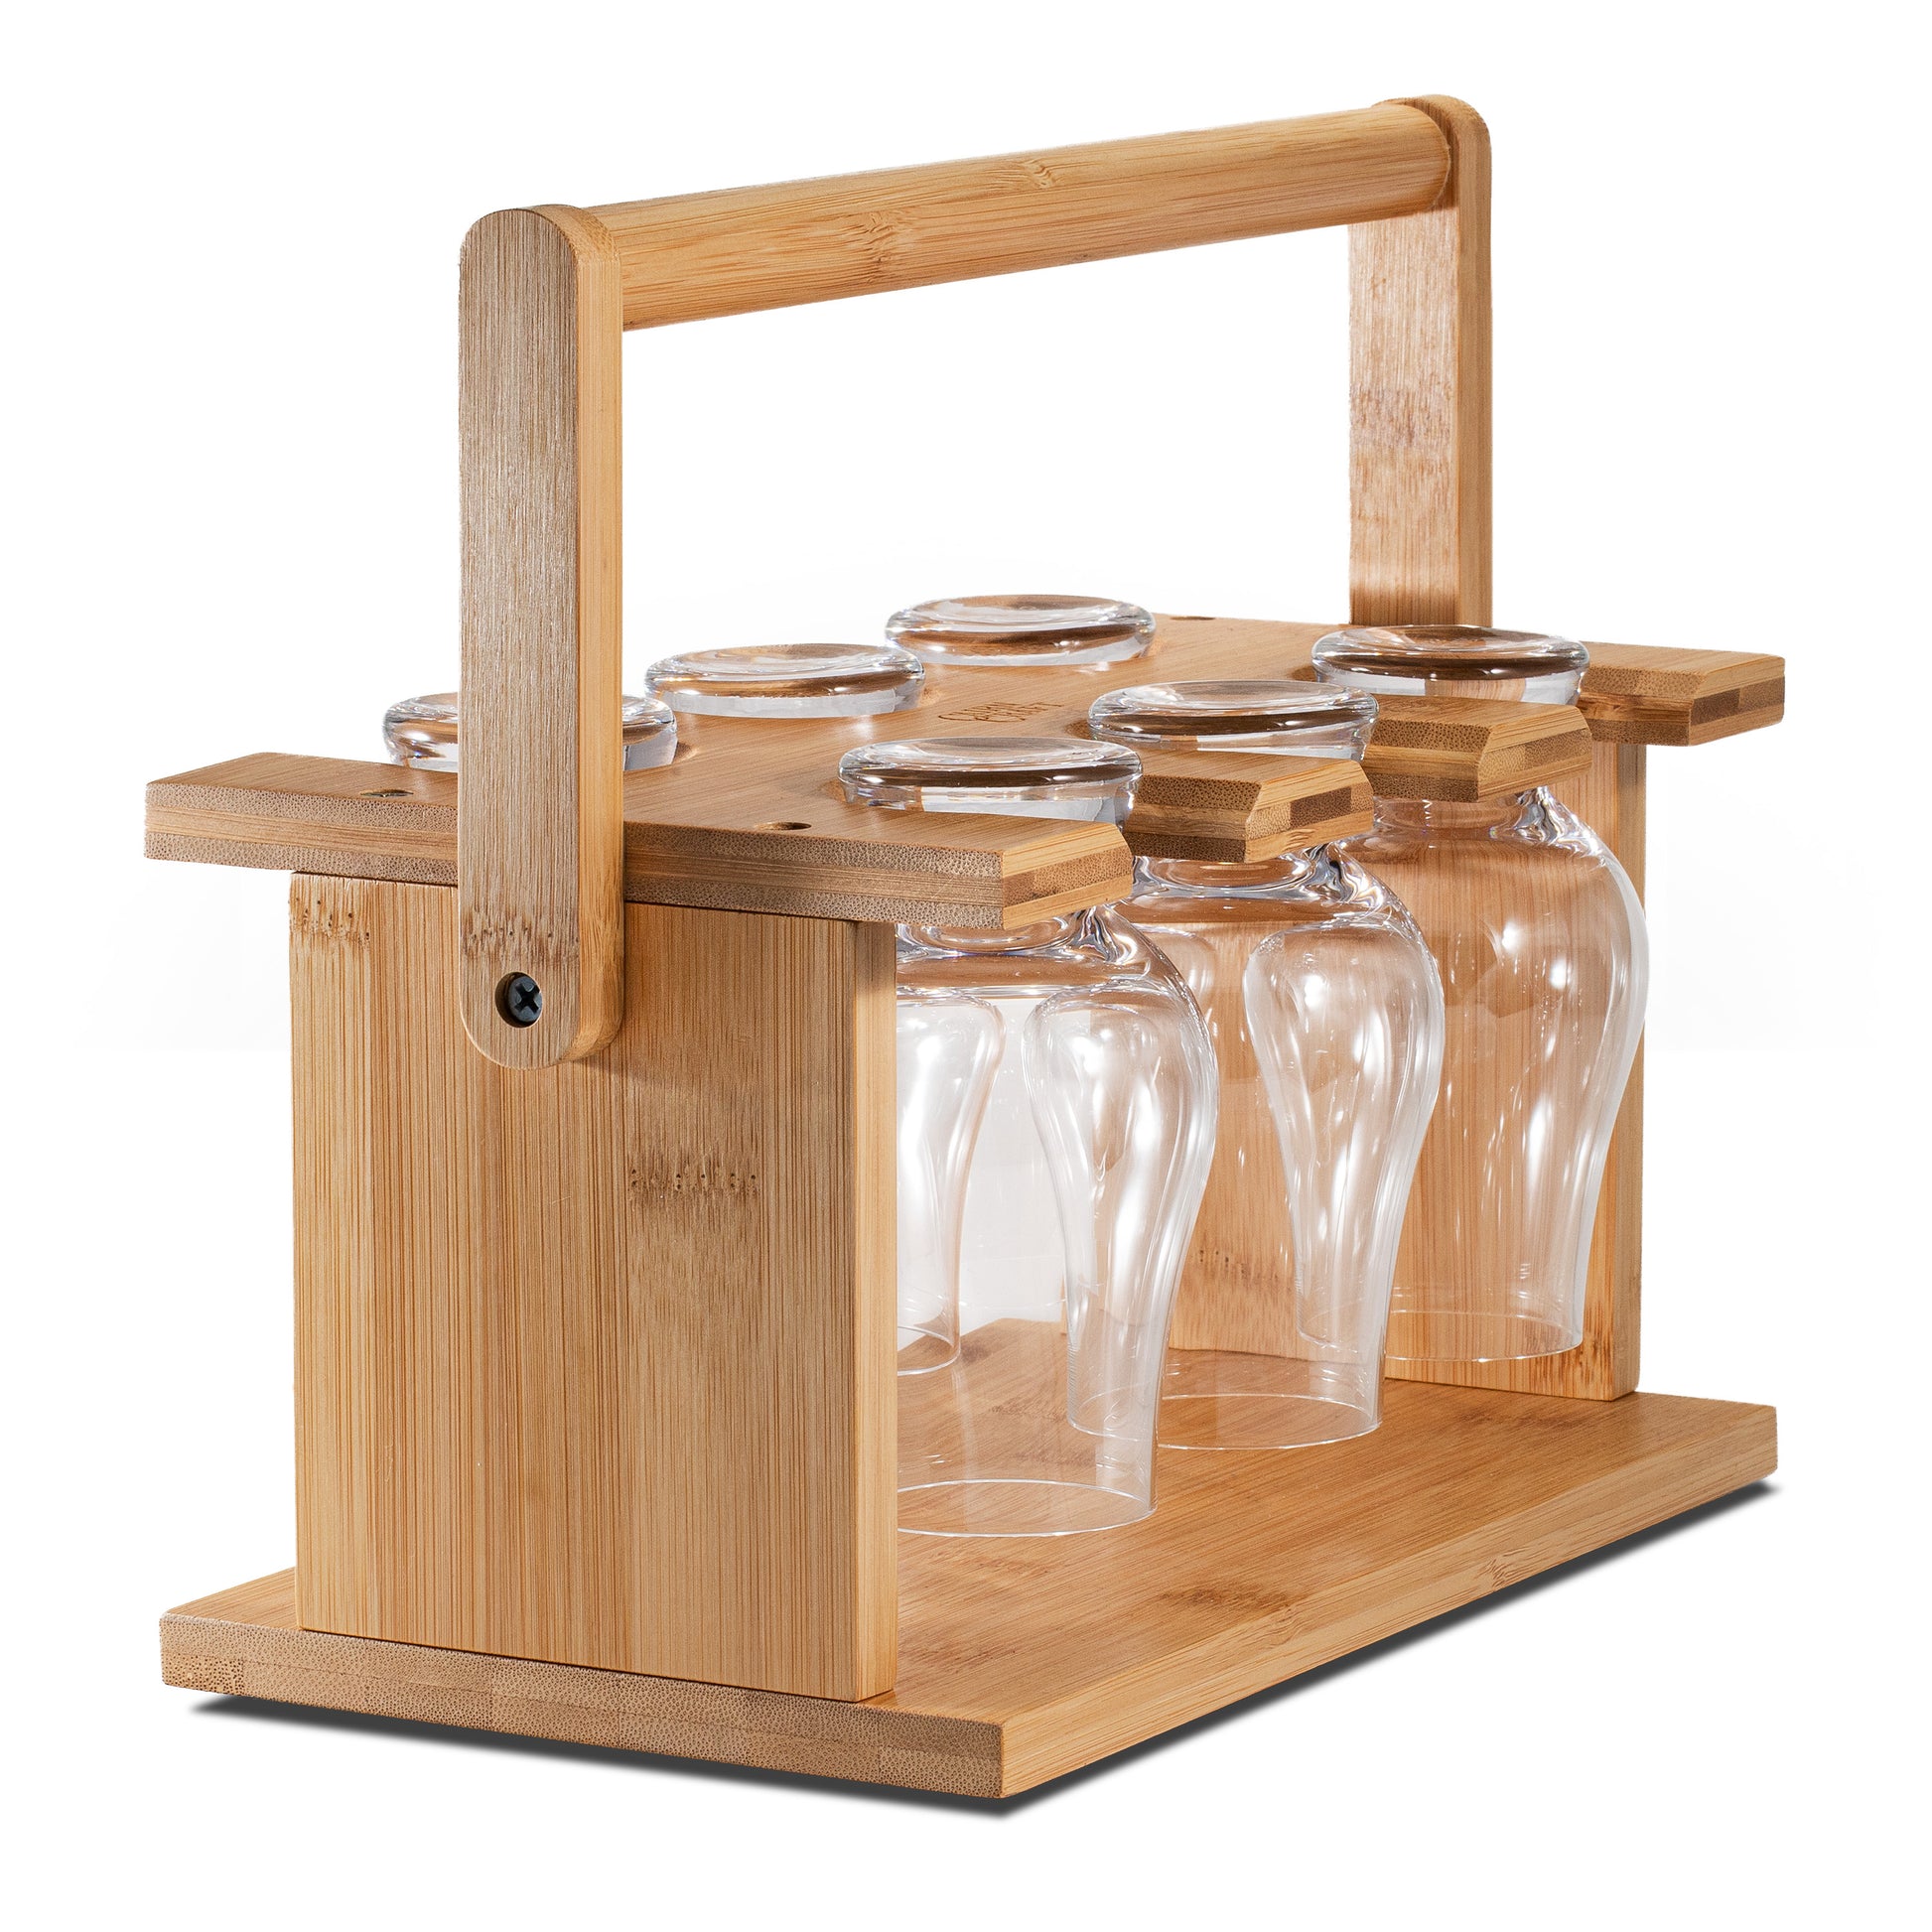 Cairn Craft CairnCaddy Bamboo Whiskey Glass Holder - Carrier and Drying Rack for Whisky Tasting Glassware